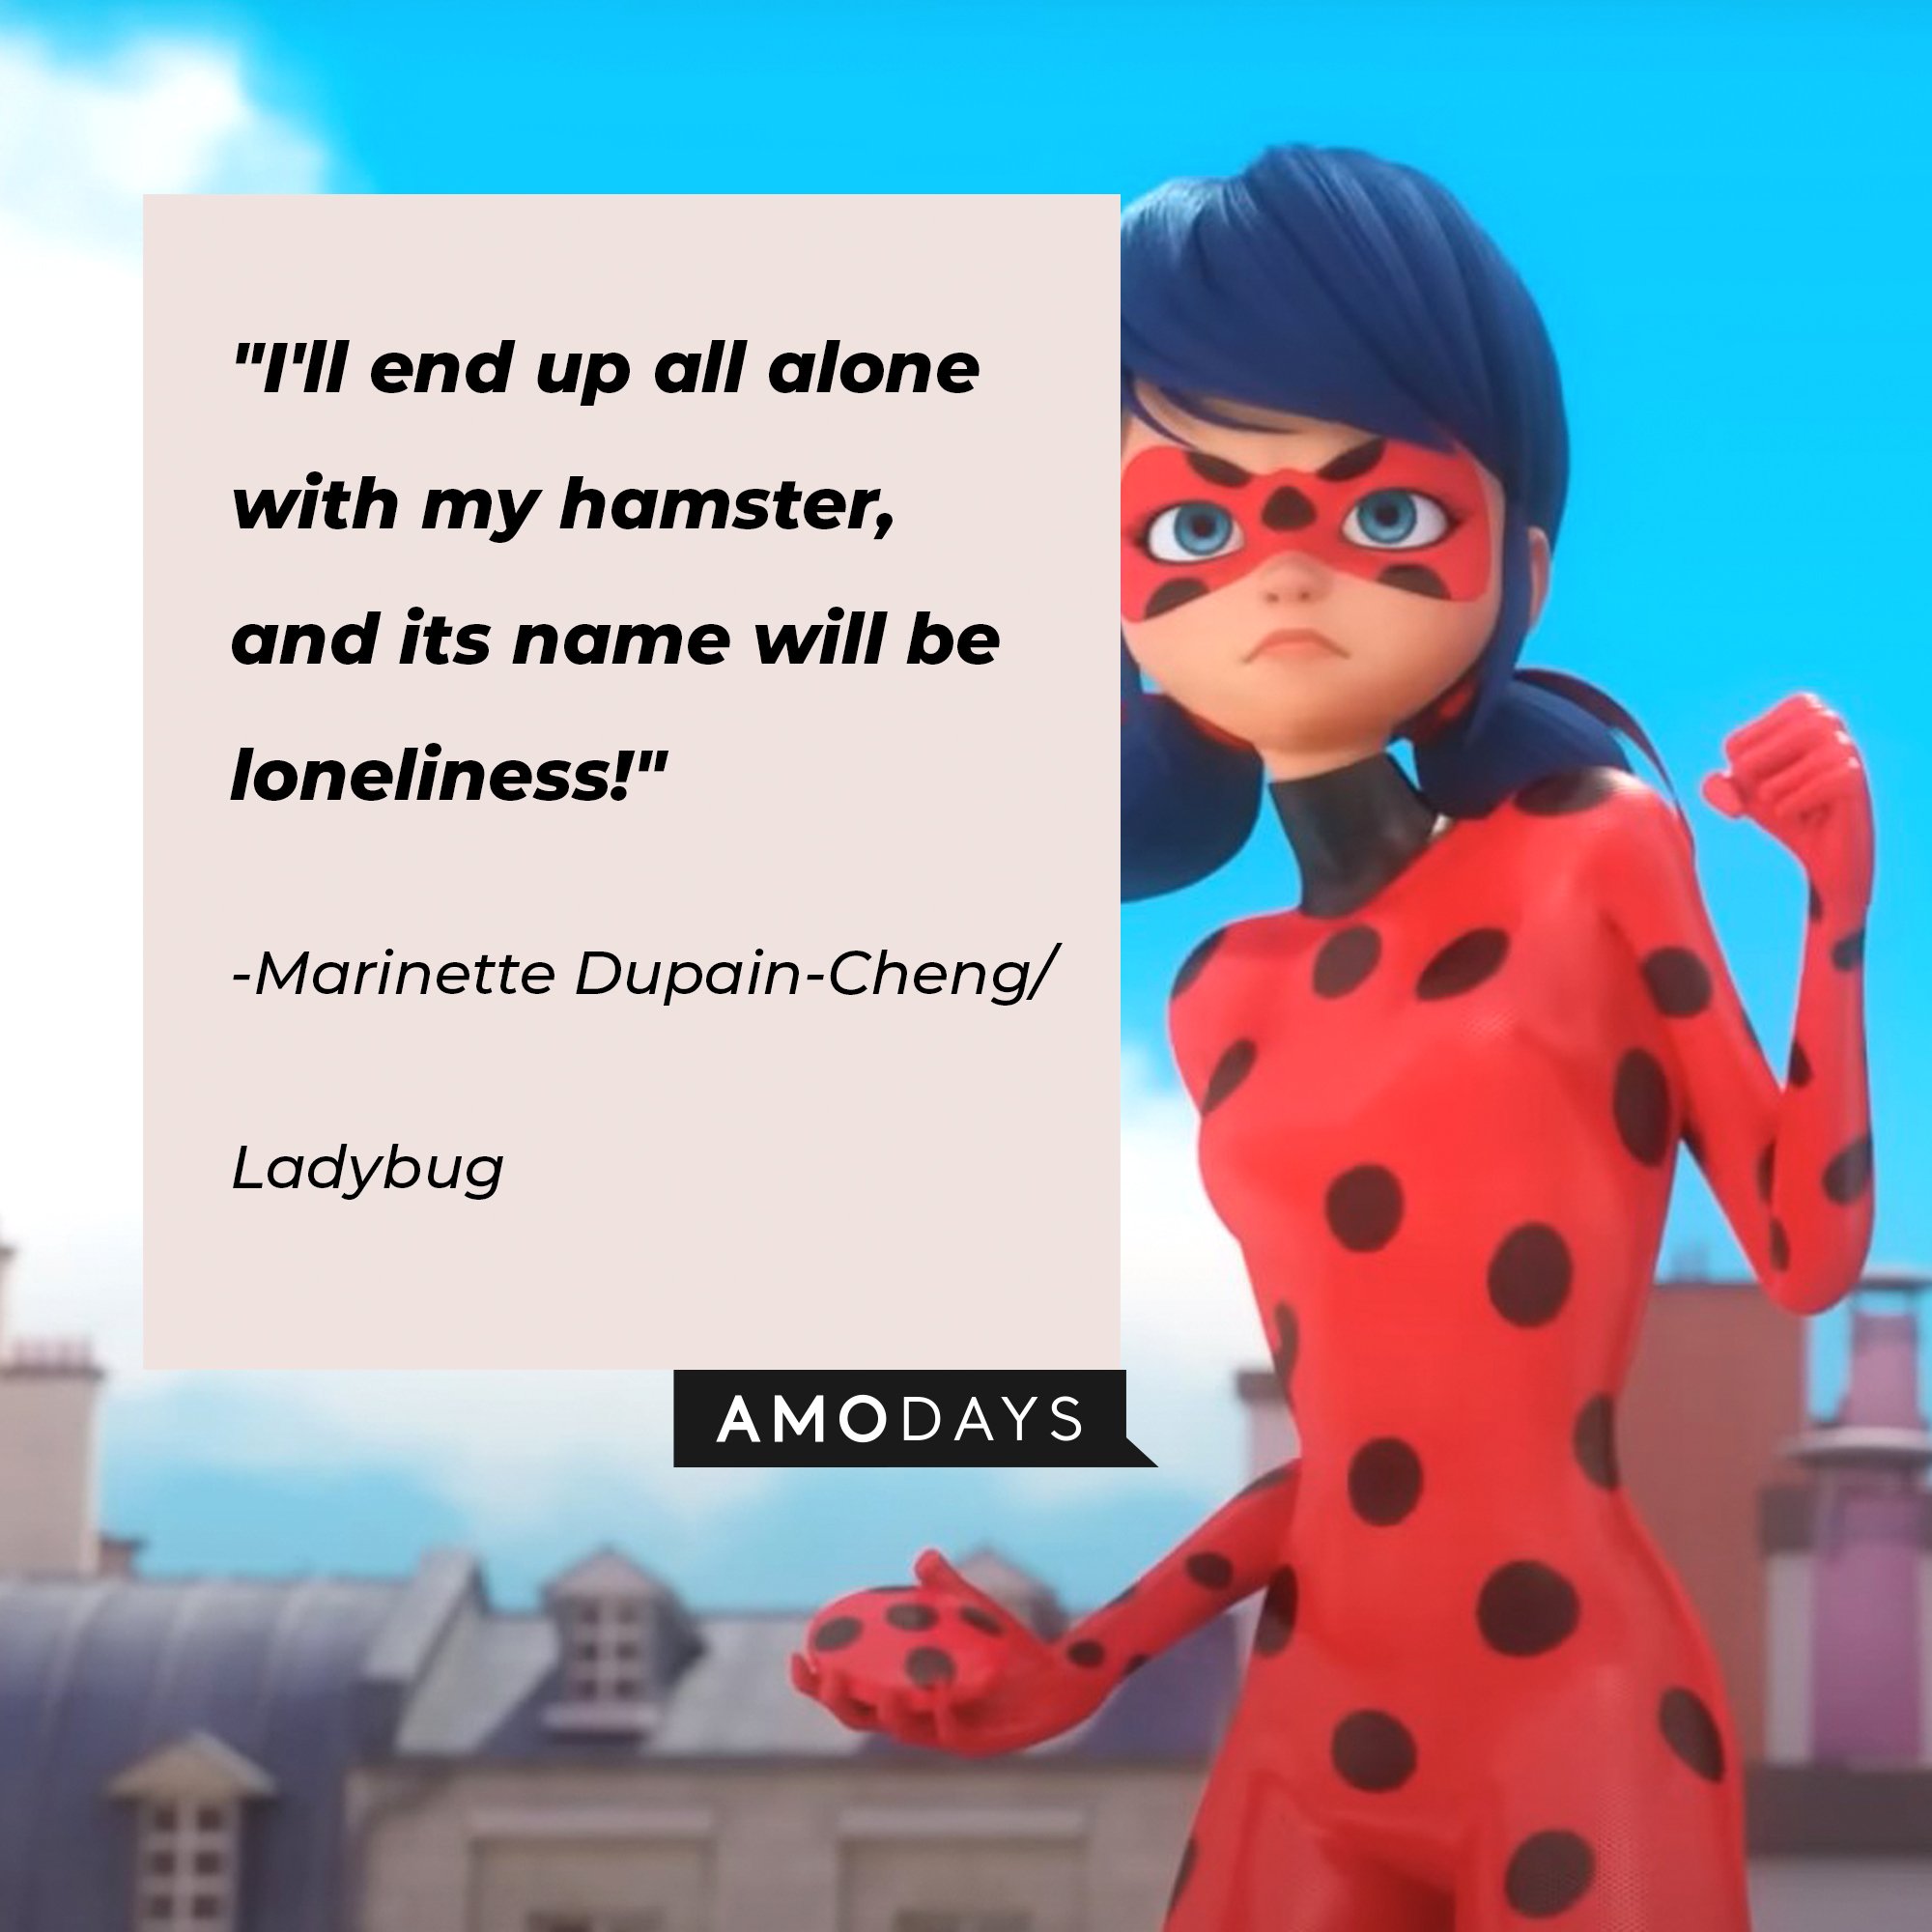 Marinette Dupain-Cheng/Ladybug’s quote: "I'll end up all alone with my hamster, and its name will be loneliness!" | Image: AmoDays